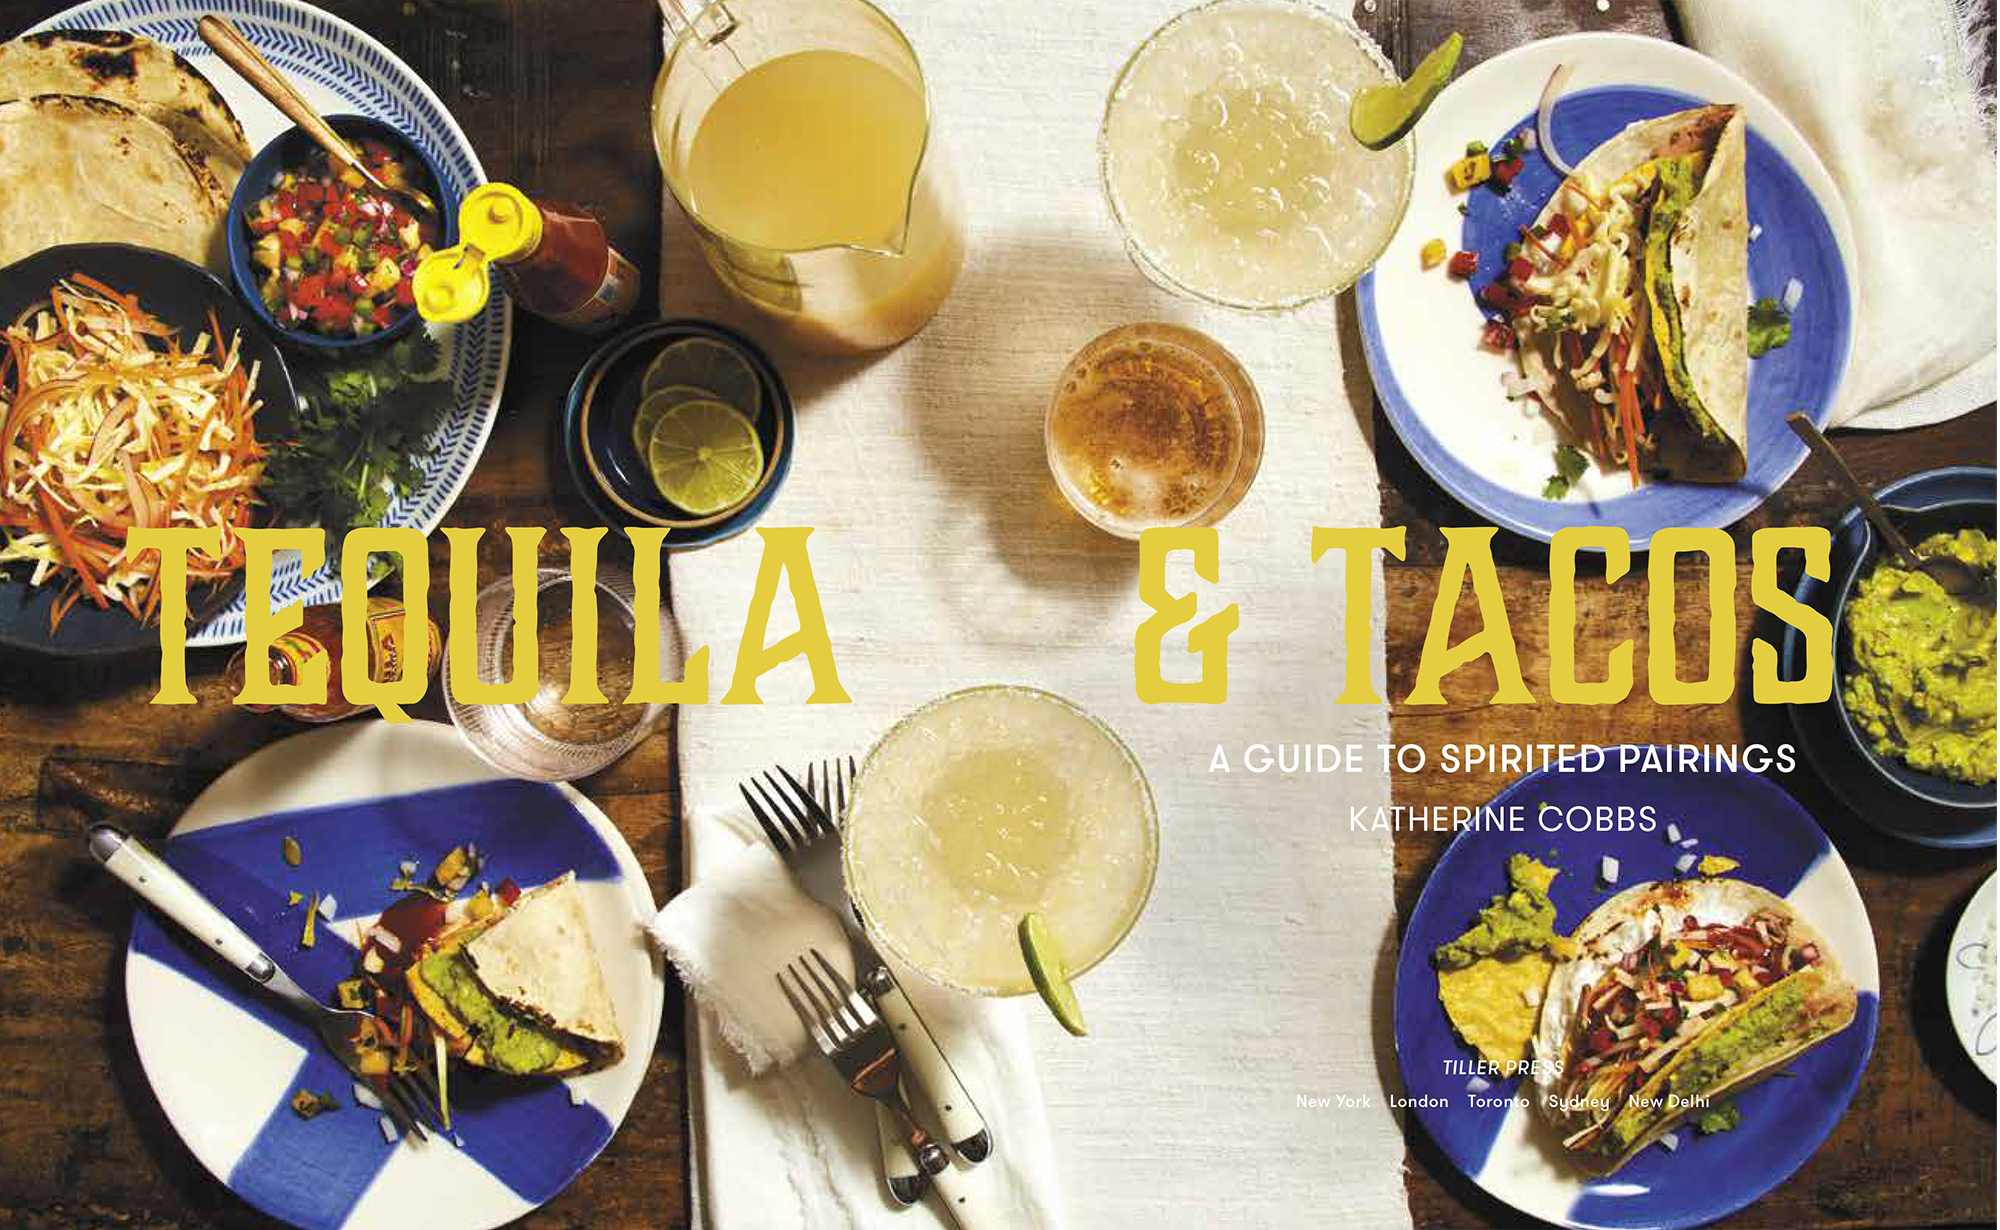 Tequila Tacos A Guide to Spirited Pairings - image 2